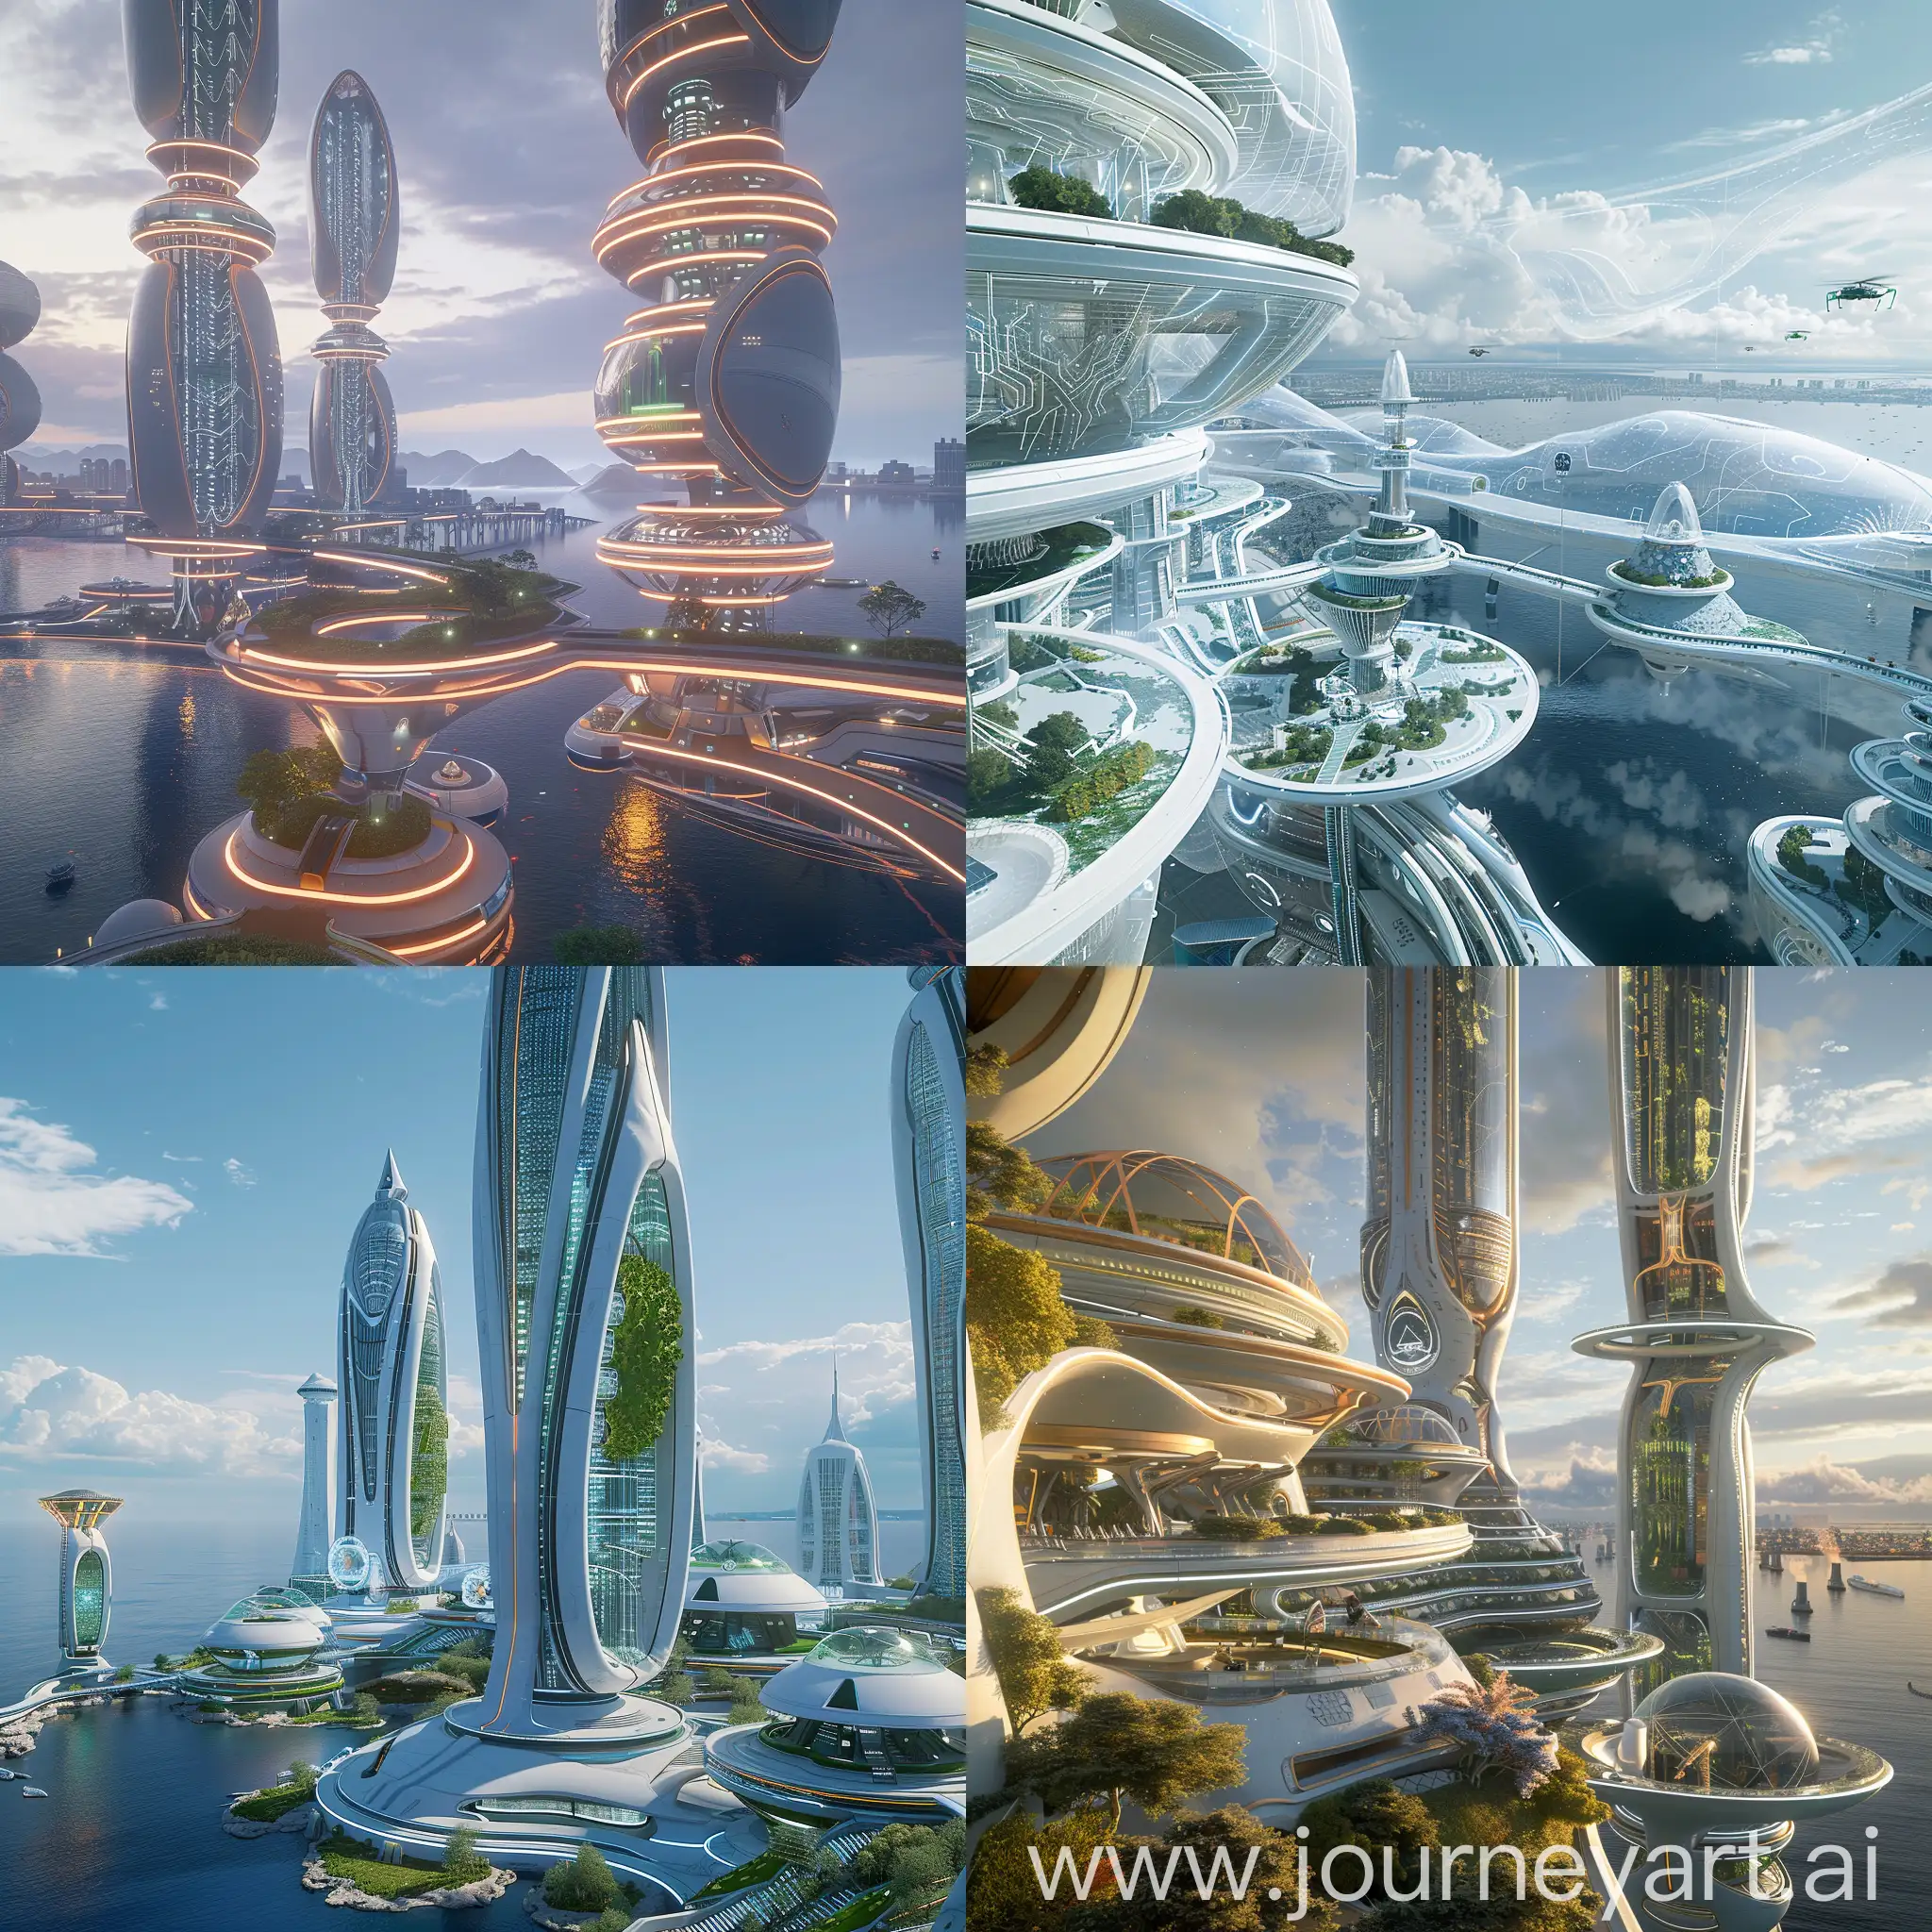 Futuristic Vladivostok, Neuro-Wires (inspired by Deus Ex: Human Revolution), Bio-Organic Power Cells (inspired by Cyberpunk 2077), Nanotech Repair Systems (inspired by Horizon: Zero Dawn), Hyperconductive Transit Tubes (inspired by Futurama), Hydroponic Vertical Gardens (inspired by Cloudpunk), Adaptive Climate Control (inspired by Mirror's Edge: Catalyst), Kinetic Energy Harvesting Floors (inspired by Syndicate Wars), Modular Reconfigurable Interiors (inspired by Ghostrunner), Holographic Information Displays (inspired by Minority Report), AI-Powered Predictive Maintenance (inspired by Ghost in the Shell), Kinetic Facades (inspired by Akira), Vertical Eco-Towers (inspired by Avatar), Atmospheric Filtration Towers (inspired by Elysium), Skytram Networks (inspired by BioShock Infinite), Underwater City Expansion (inspired by Rapture - BioShock), Seawall Power Plants (inspired by Waterworld), Smart Traffic Management Systems (inspired by Detroit: Become Human), Weather-Shielding Domes (inspired by Logan), Automated Drone Delivery Networks (inspired by Death Stranding), Hyperloop Terminals (inspired by The Matrix), unreal engine 5 --stylize 1000